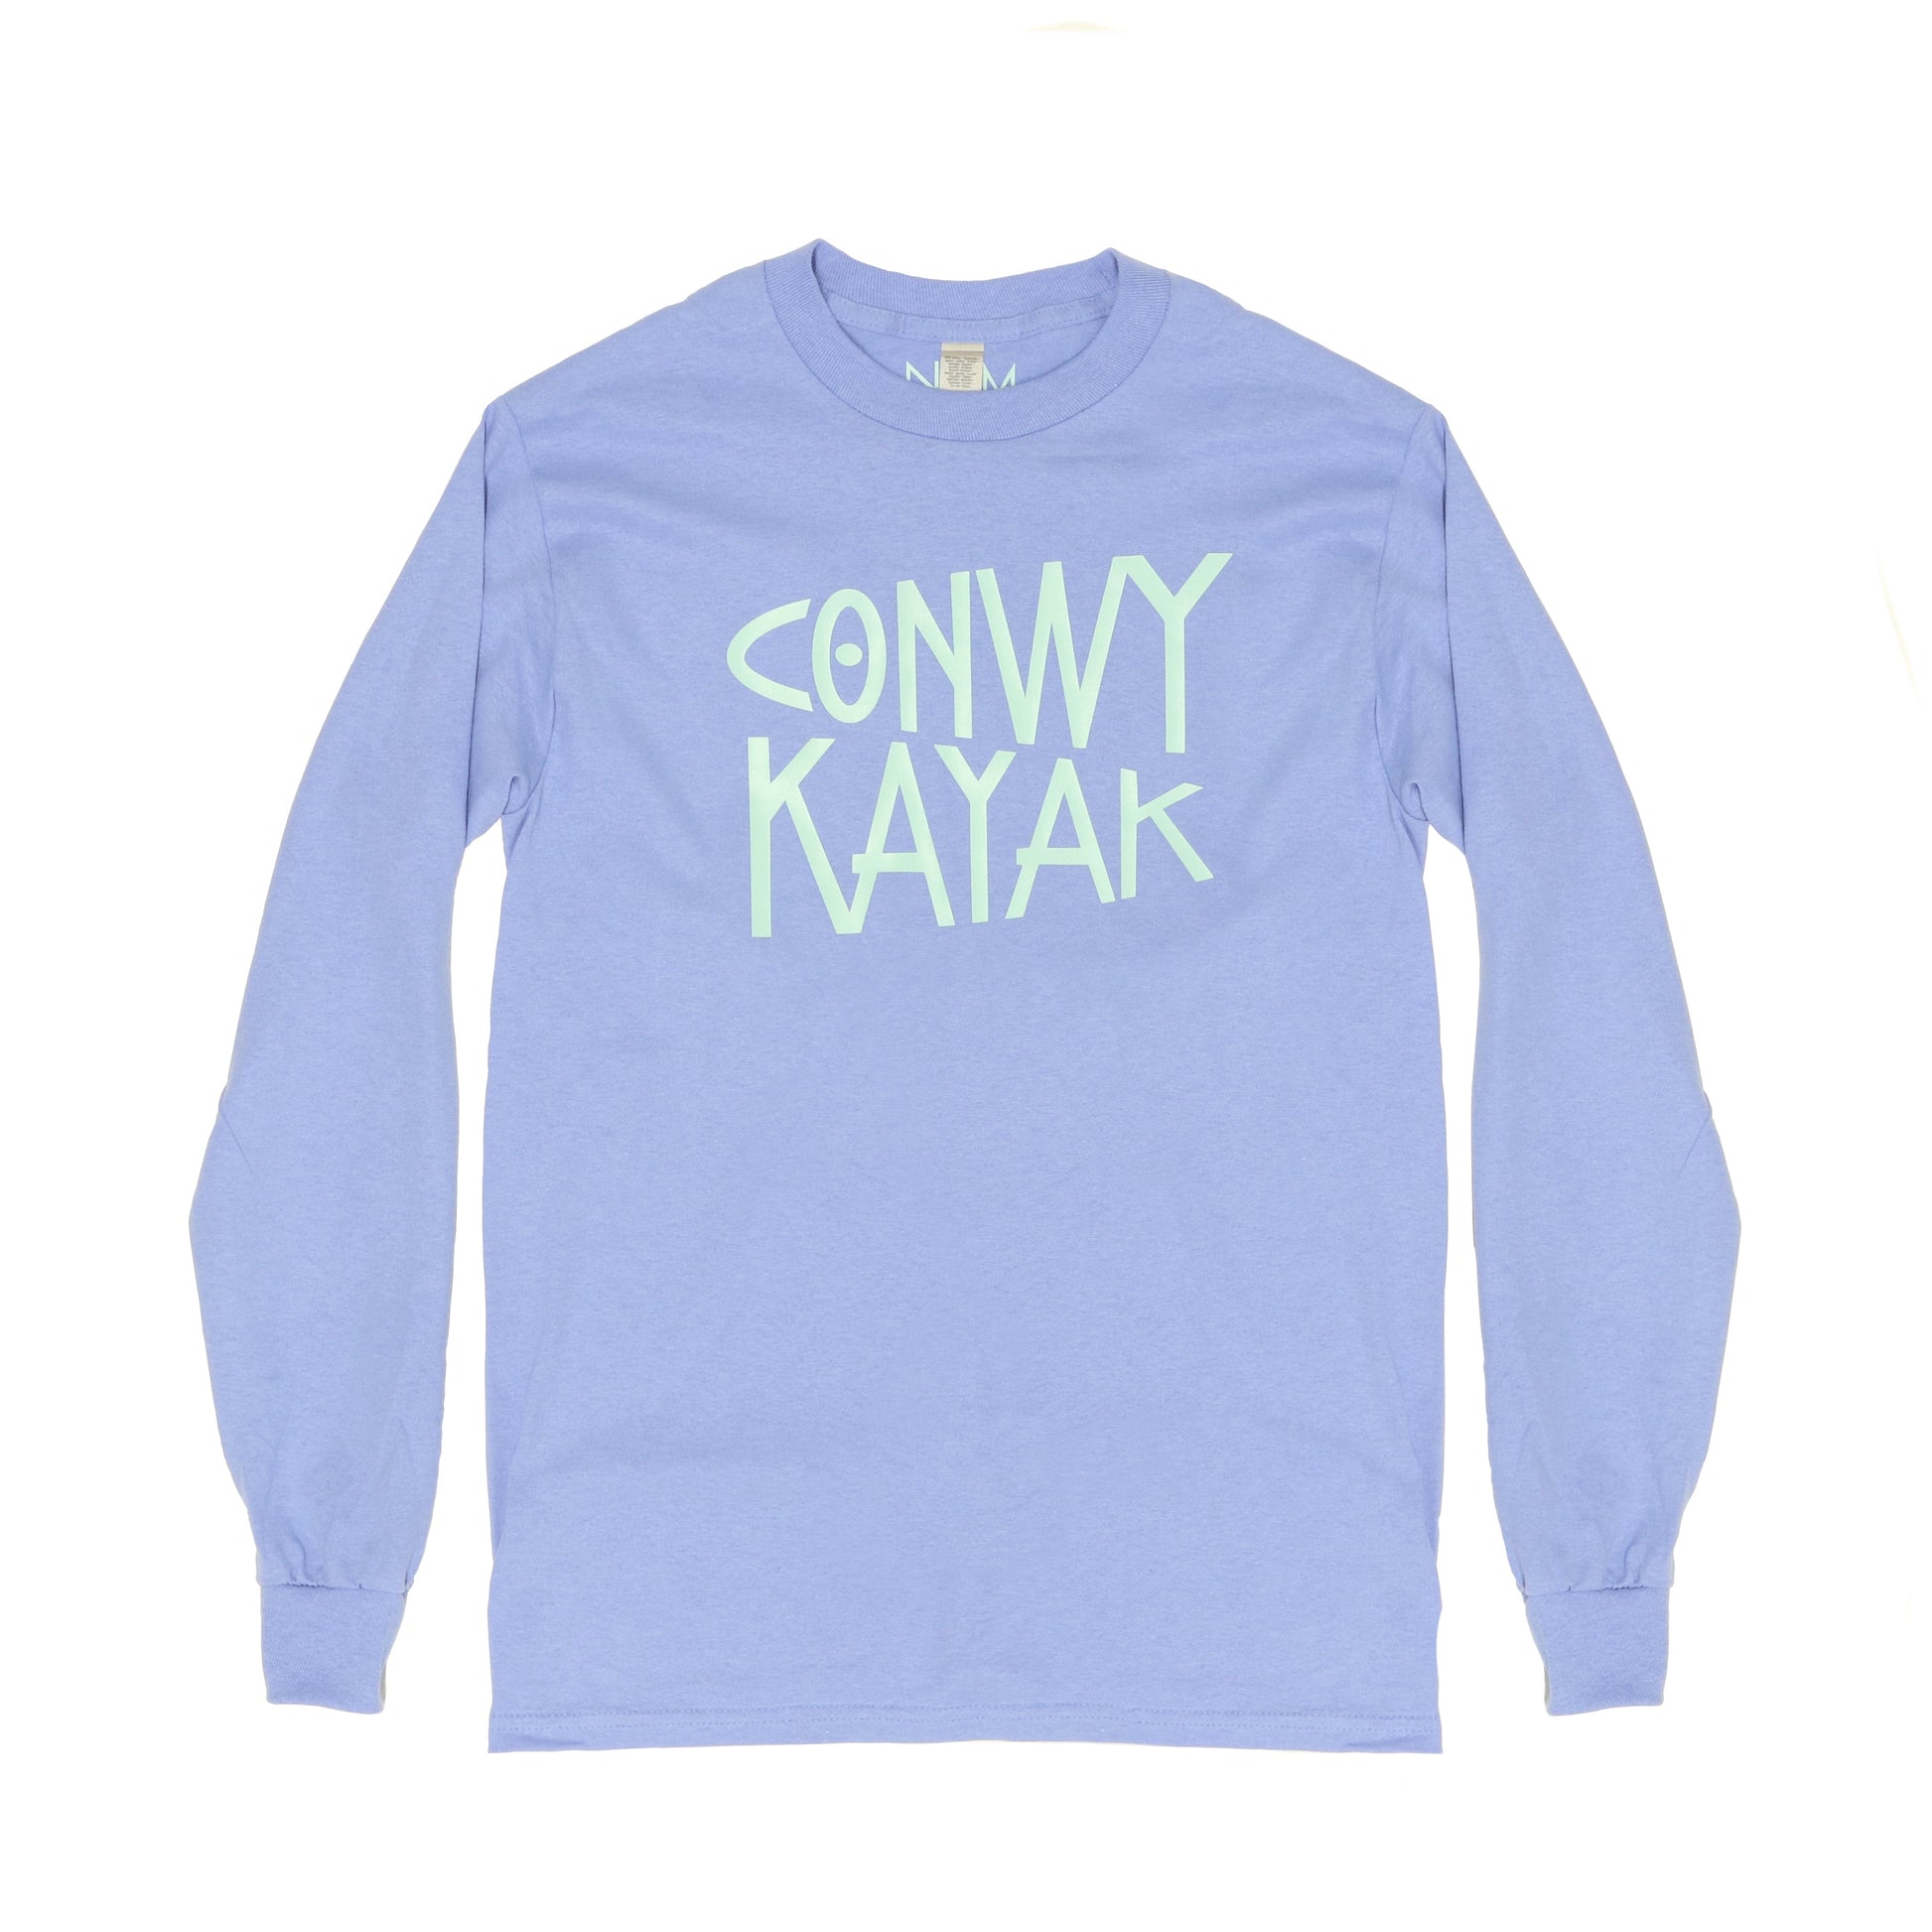 Conwy Kayak - Blue Long Sleeve T-Shirt - 1